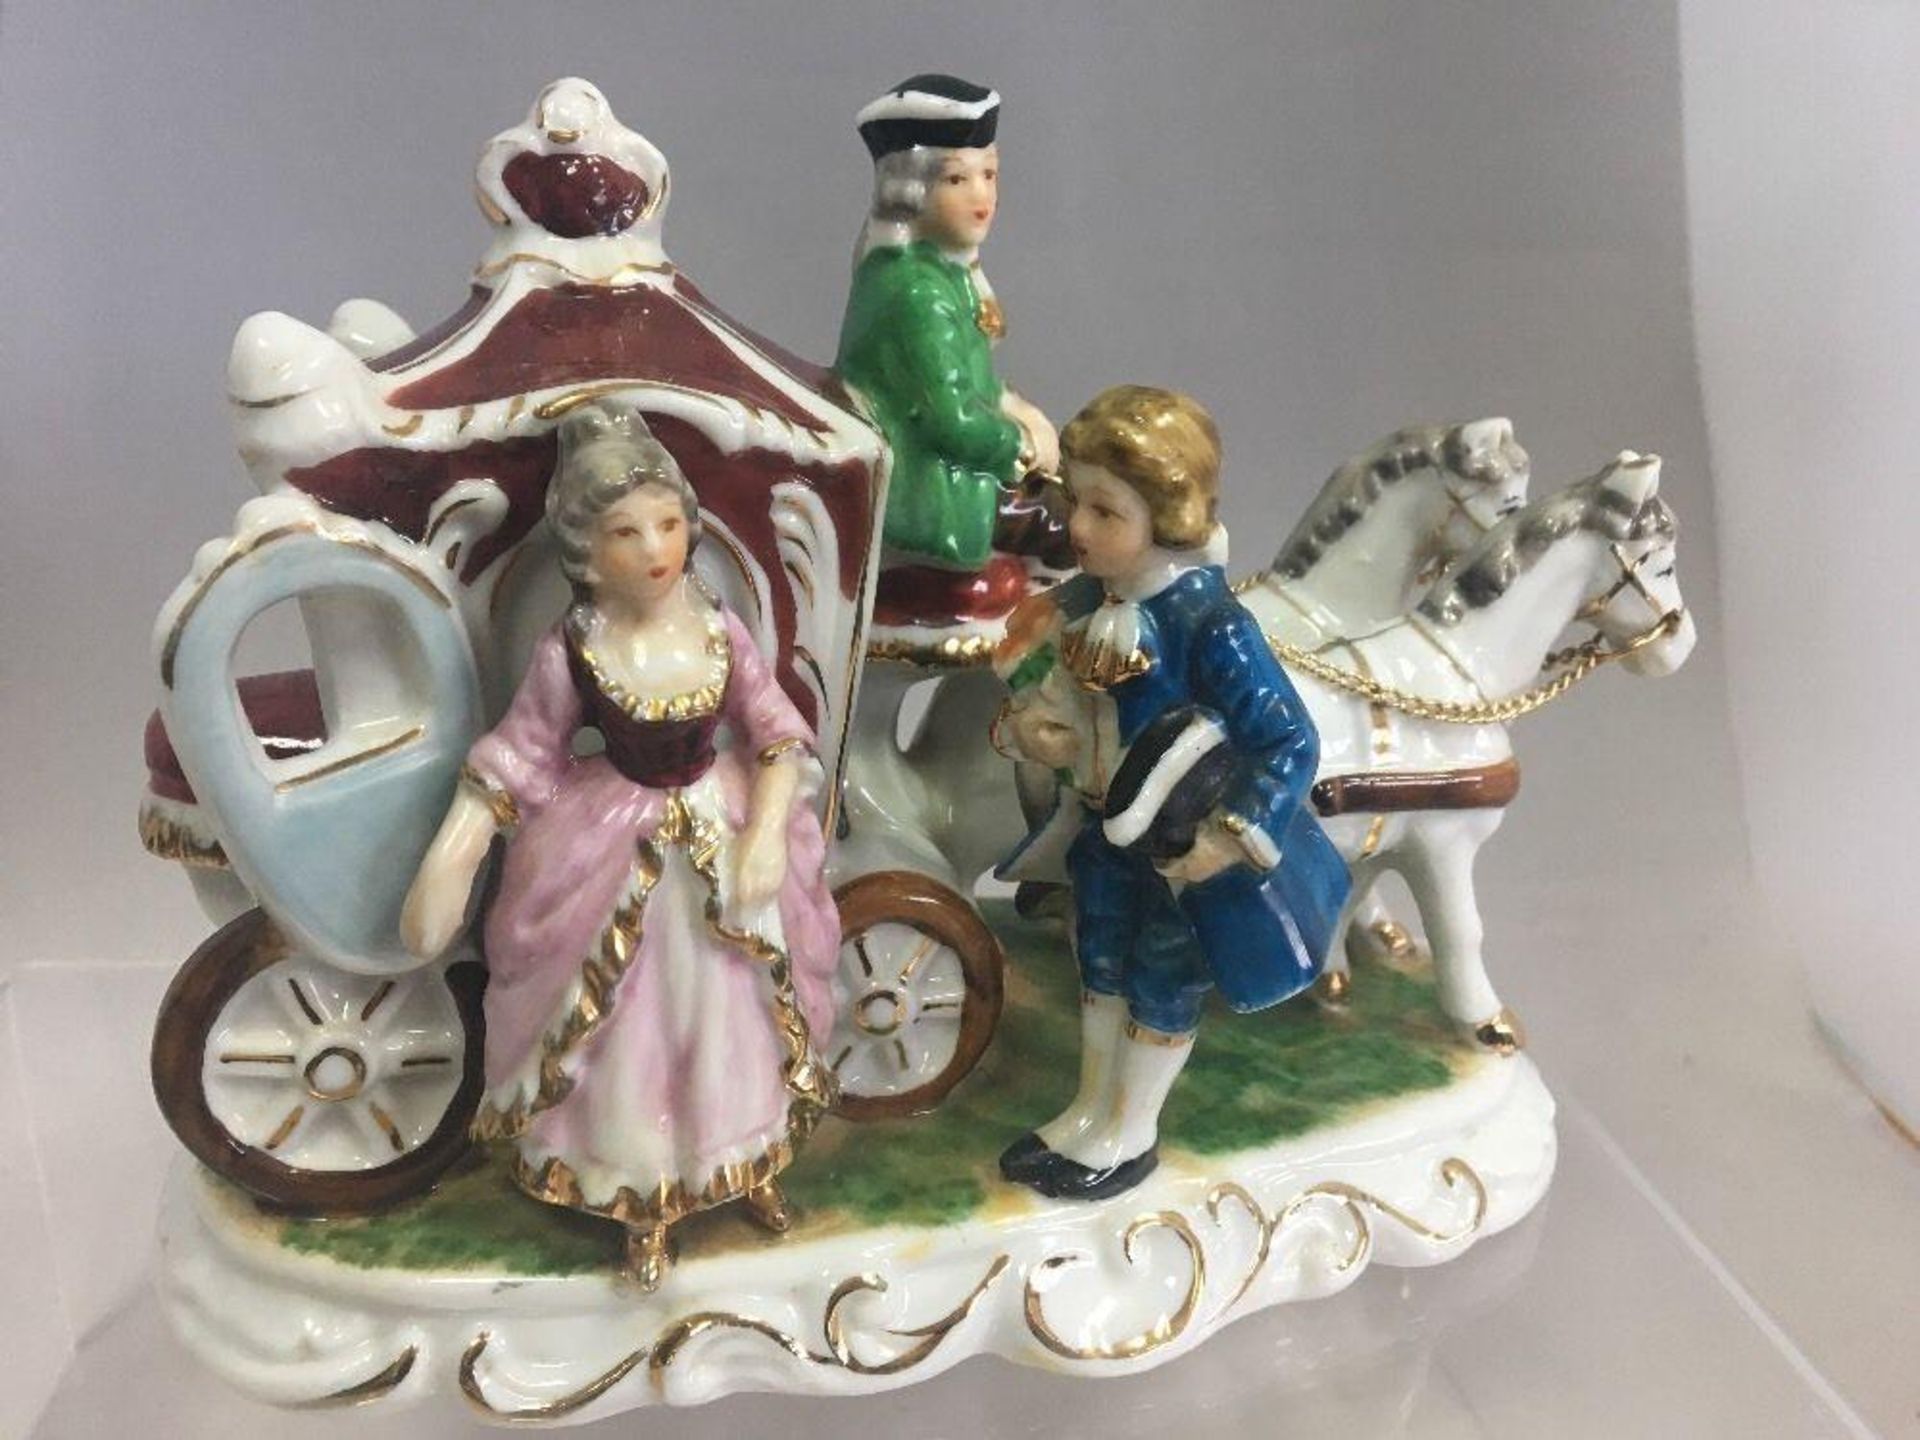 Vintage Porcelain Horse and Carriage with Music Box. Makers mark impressed to base. Condition - very